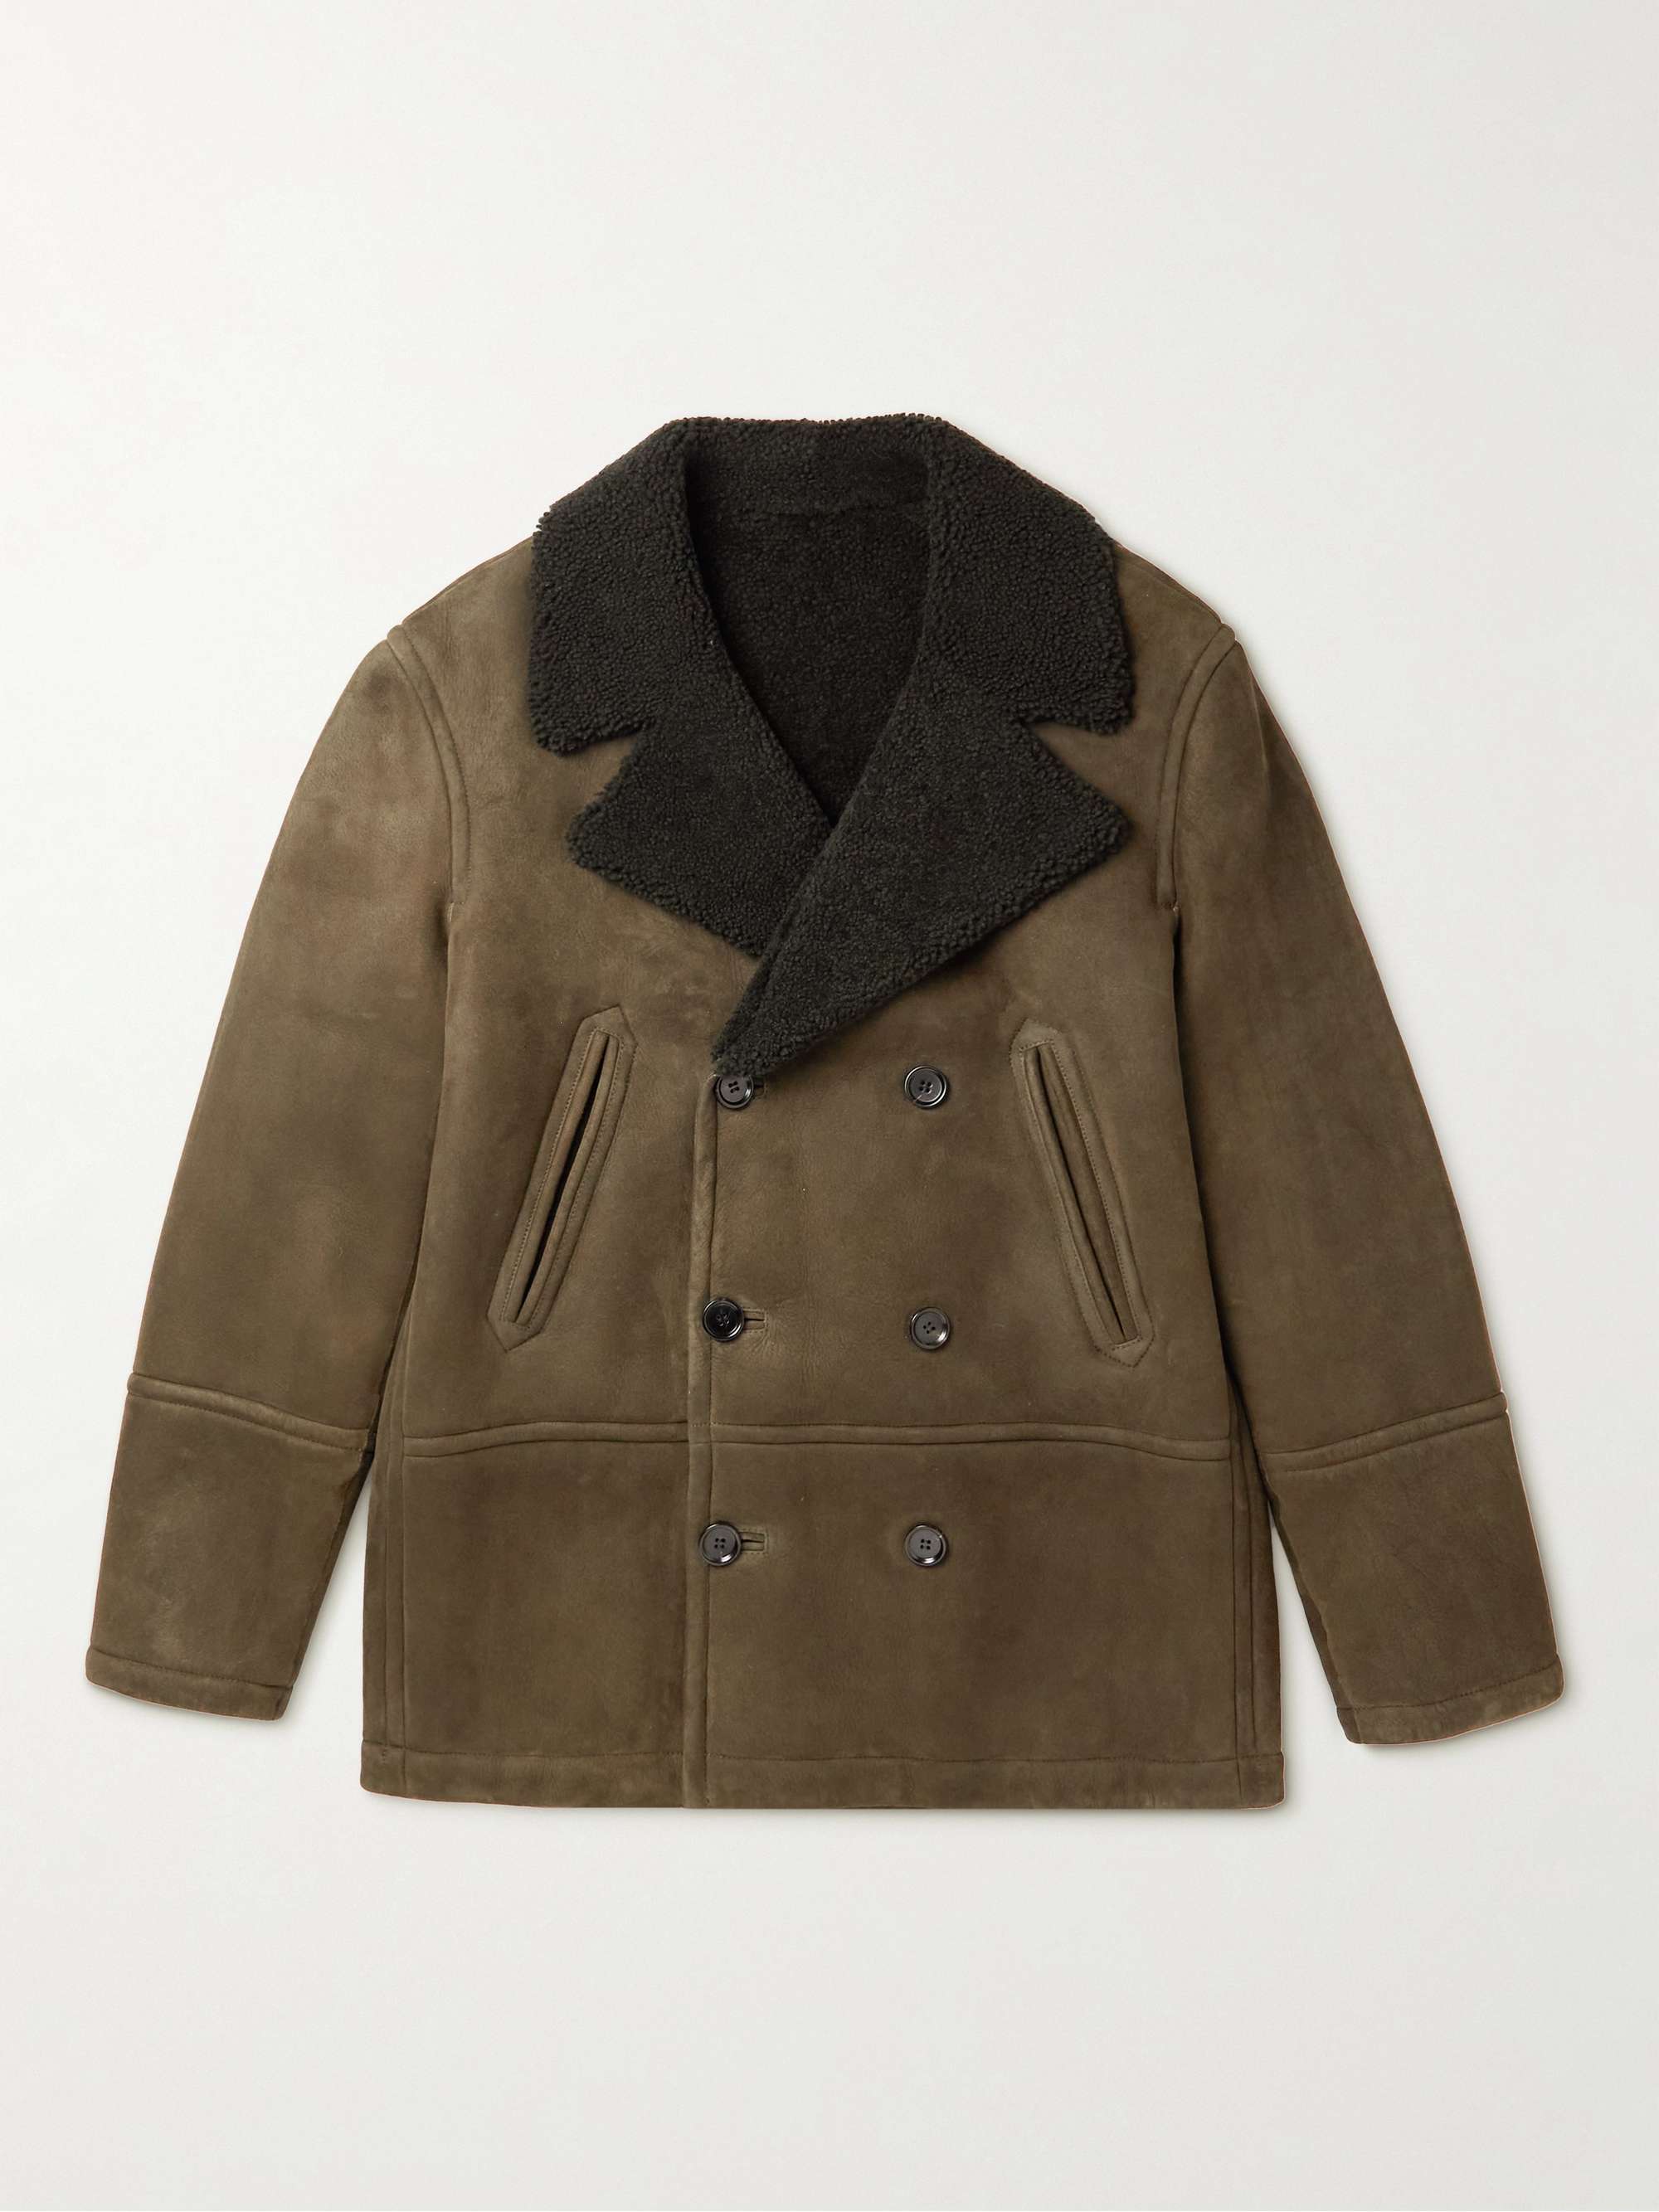 Vægt Neuropati Smil YVES SALOMON Double-Breasted Shearling-Lined Suede Peacoat for Men | MR  PORTER